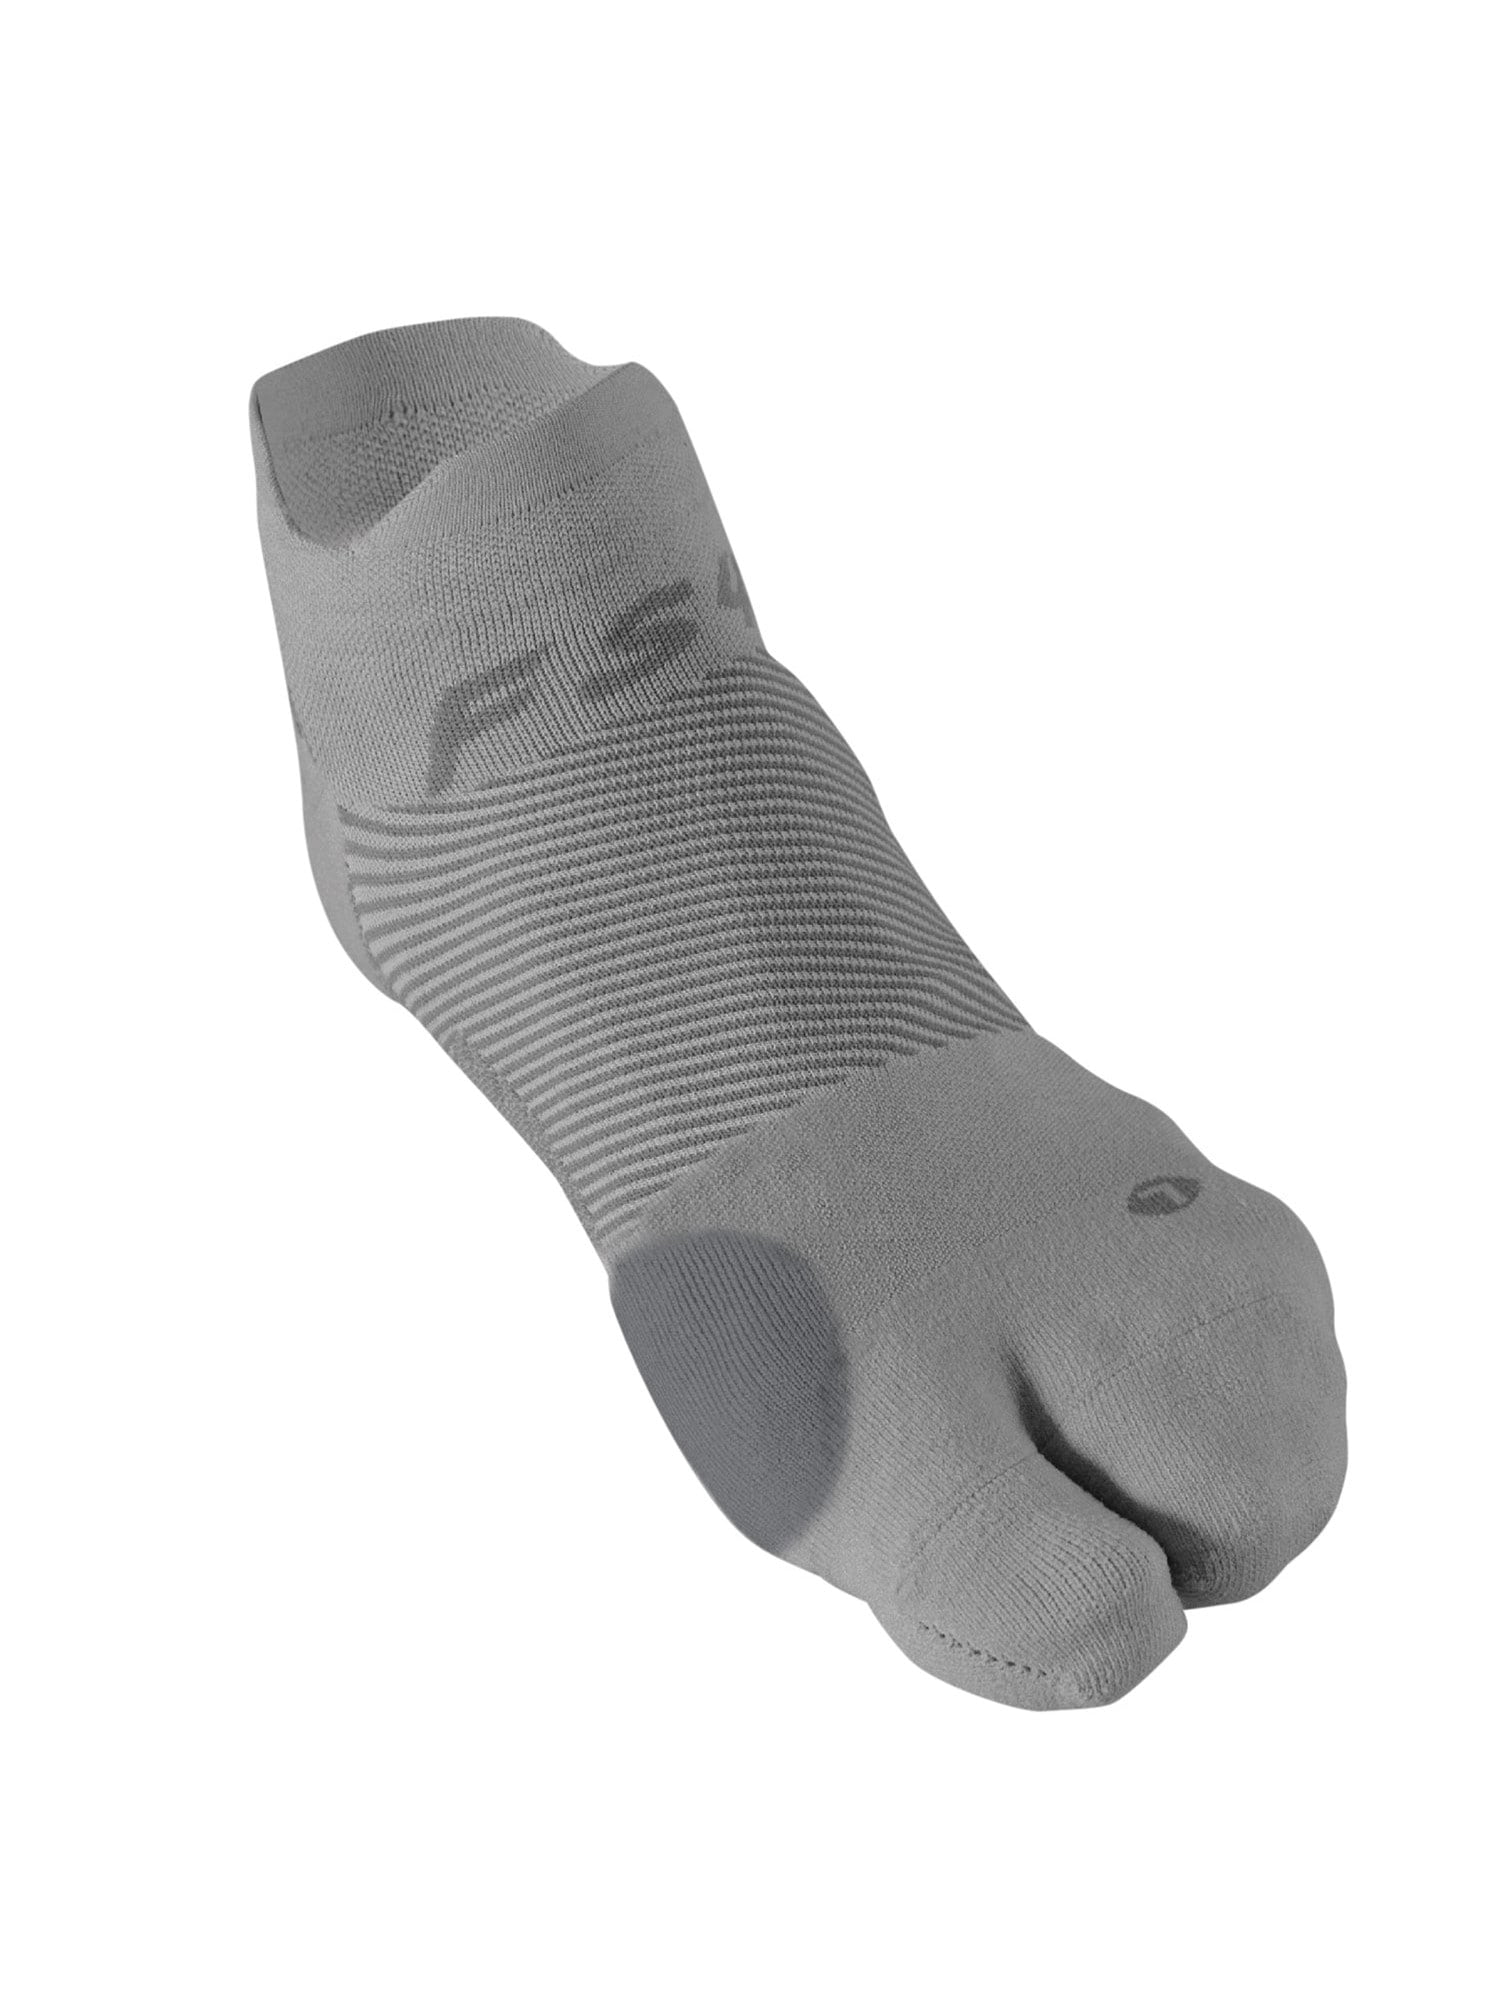 Orthosleeve BR04 Bunion Relief Socks w. Compression - Moisture Wicking  Split Toe - Gray - Large 